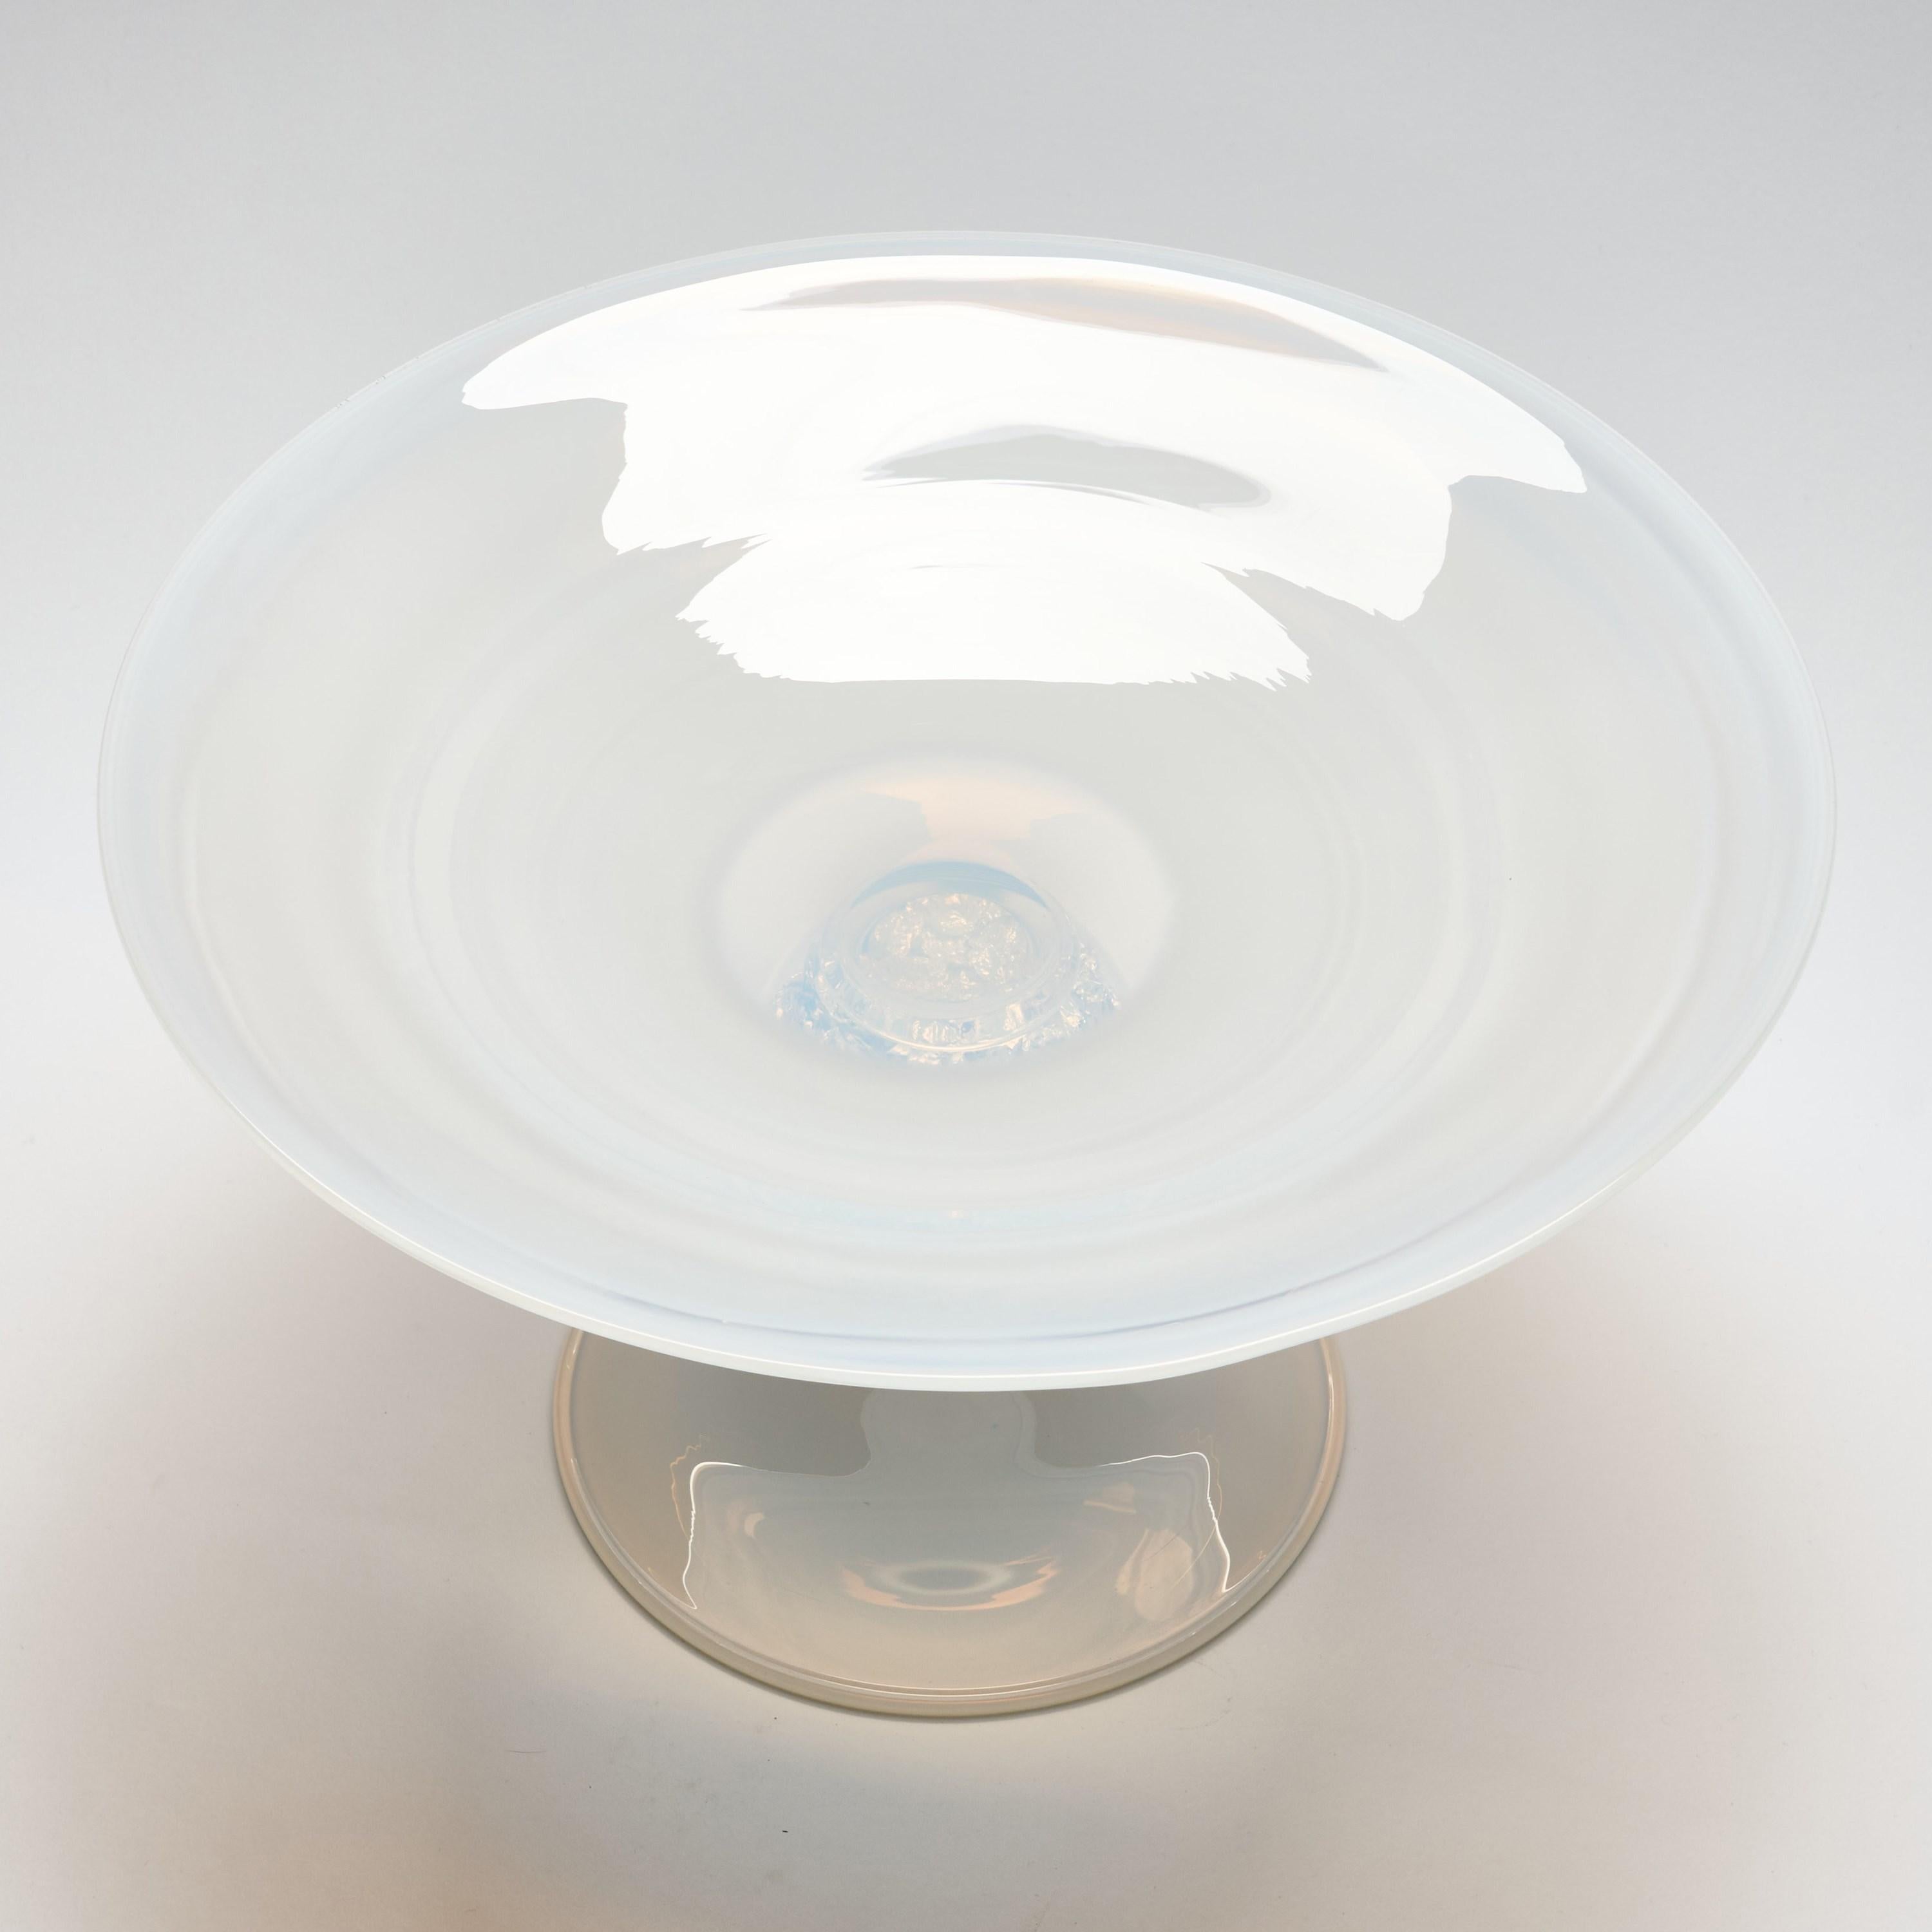 Gambo d’Argento a milky white glass & silver leaf centrepiece by Anthony Scala In New Condition For Sale In London, GB